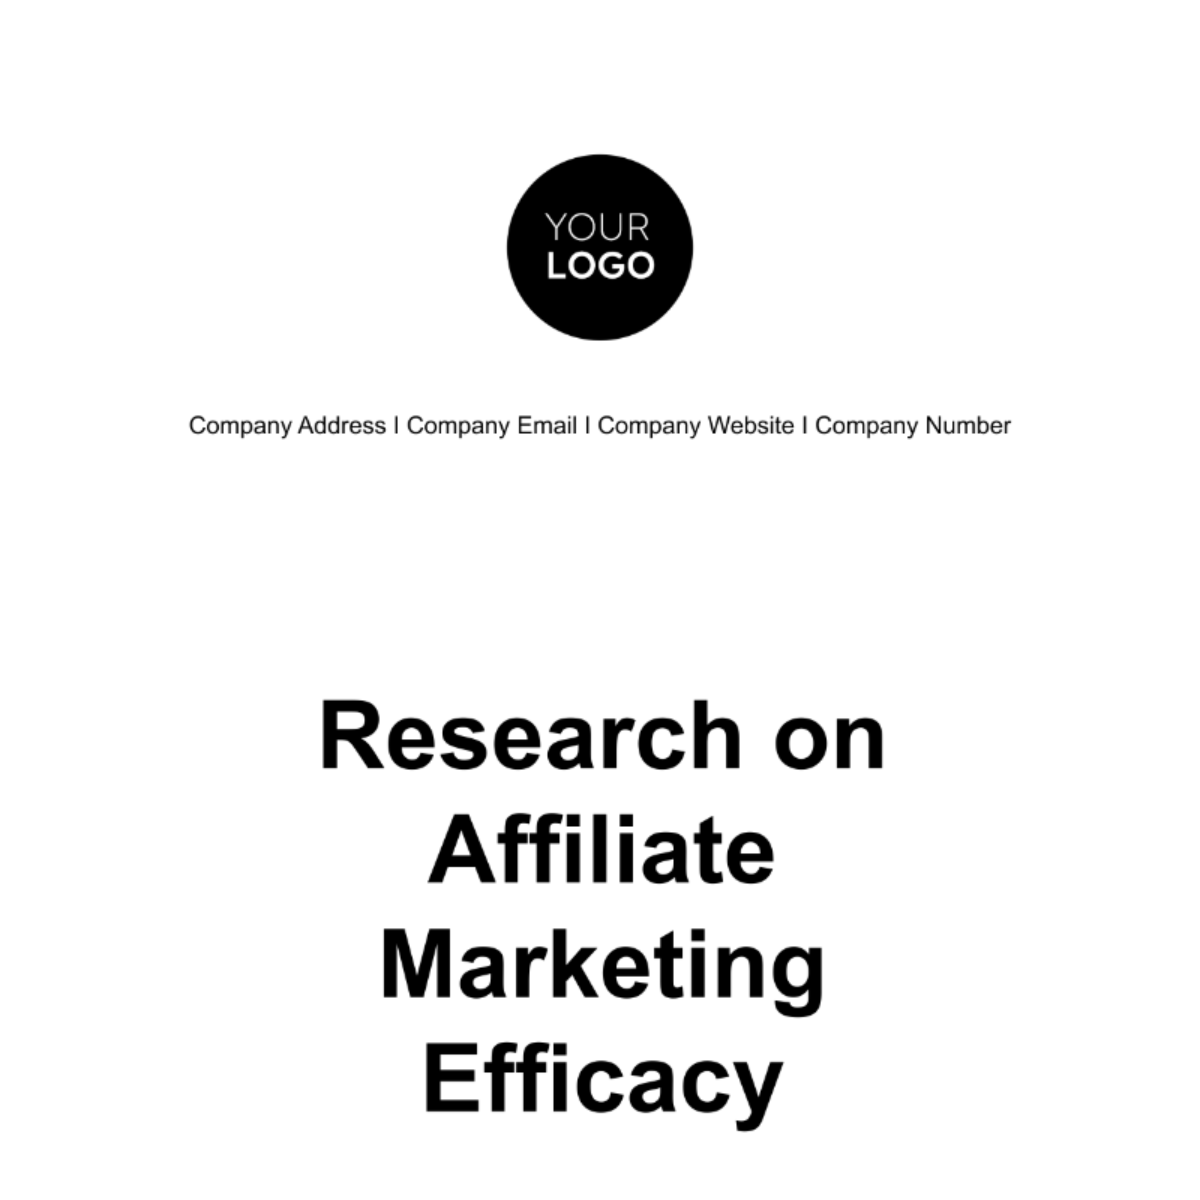 Research on Affiliate Marketing Efficacy Template